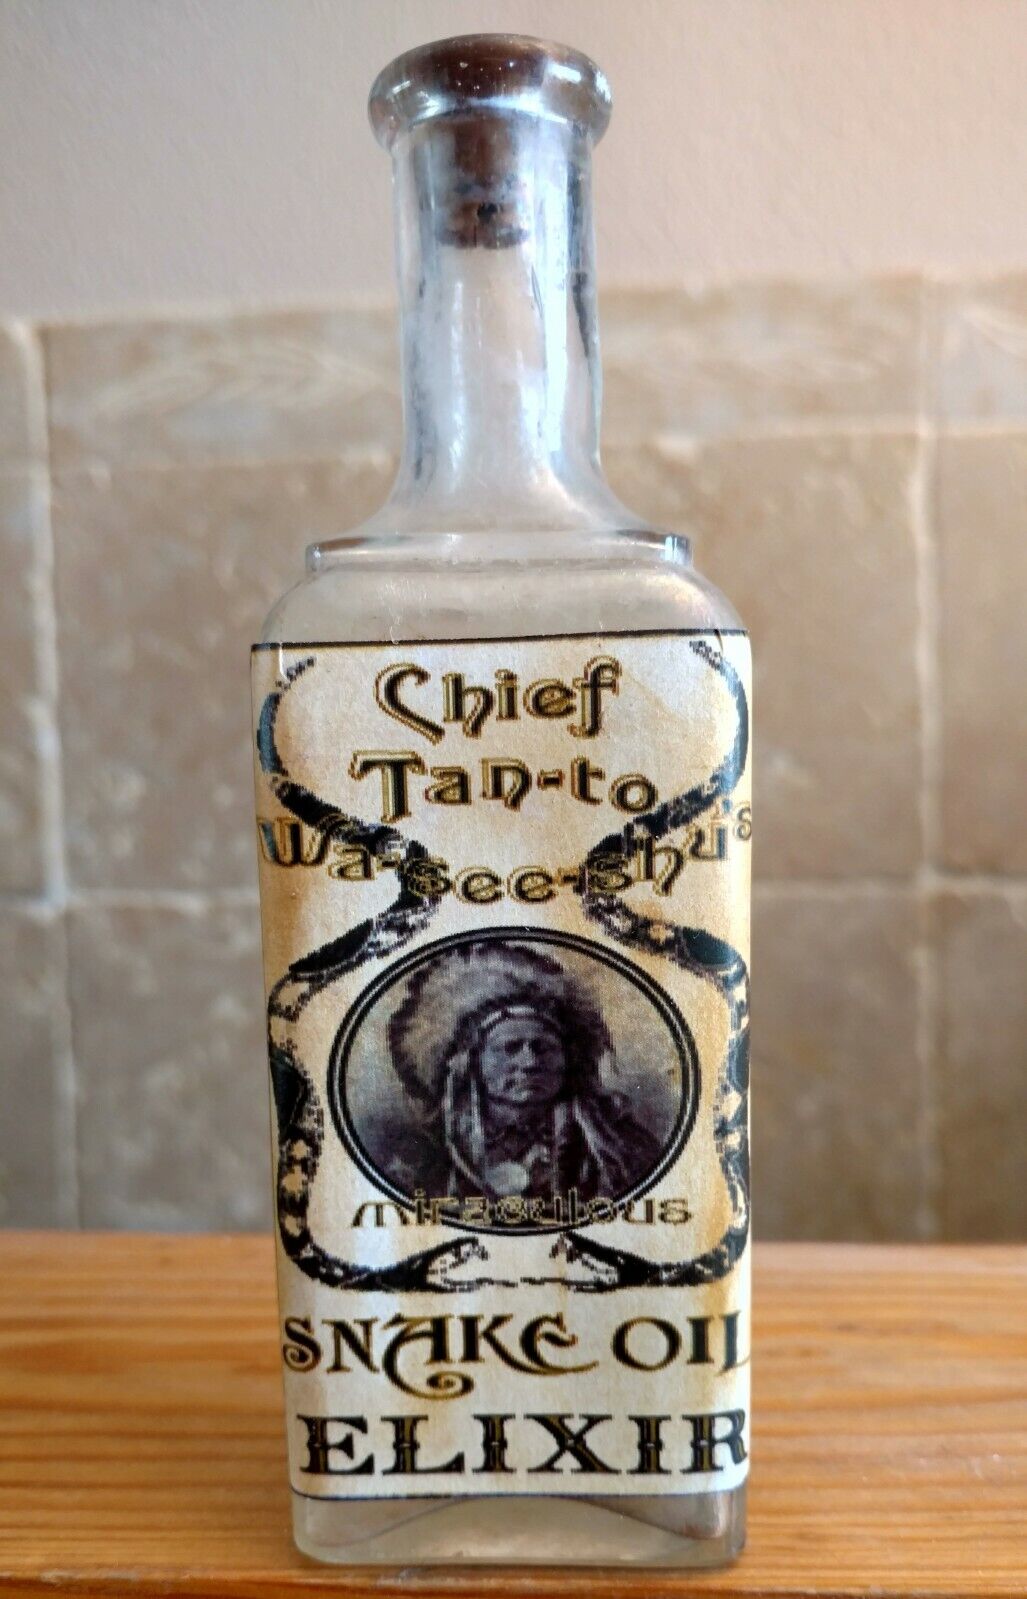 Vintage Medicine Hand Crafted Bottle,Chief Tan-To Snake Oil Elixir (EMPTY, COPY)